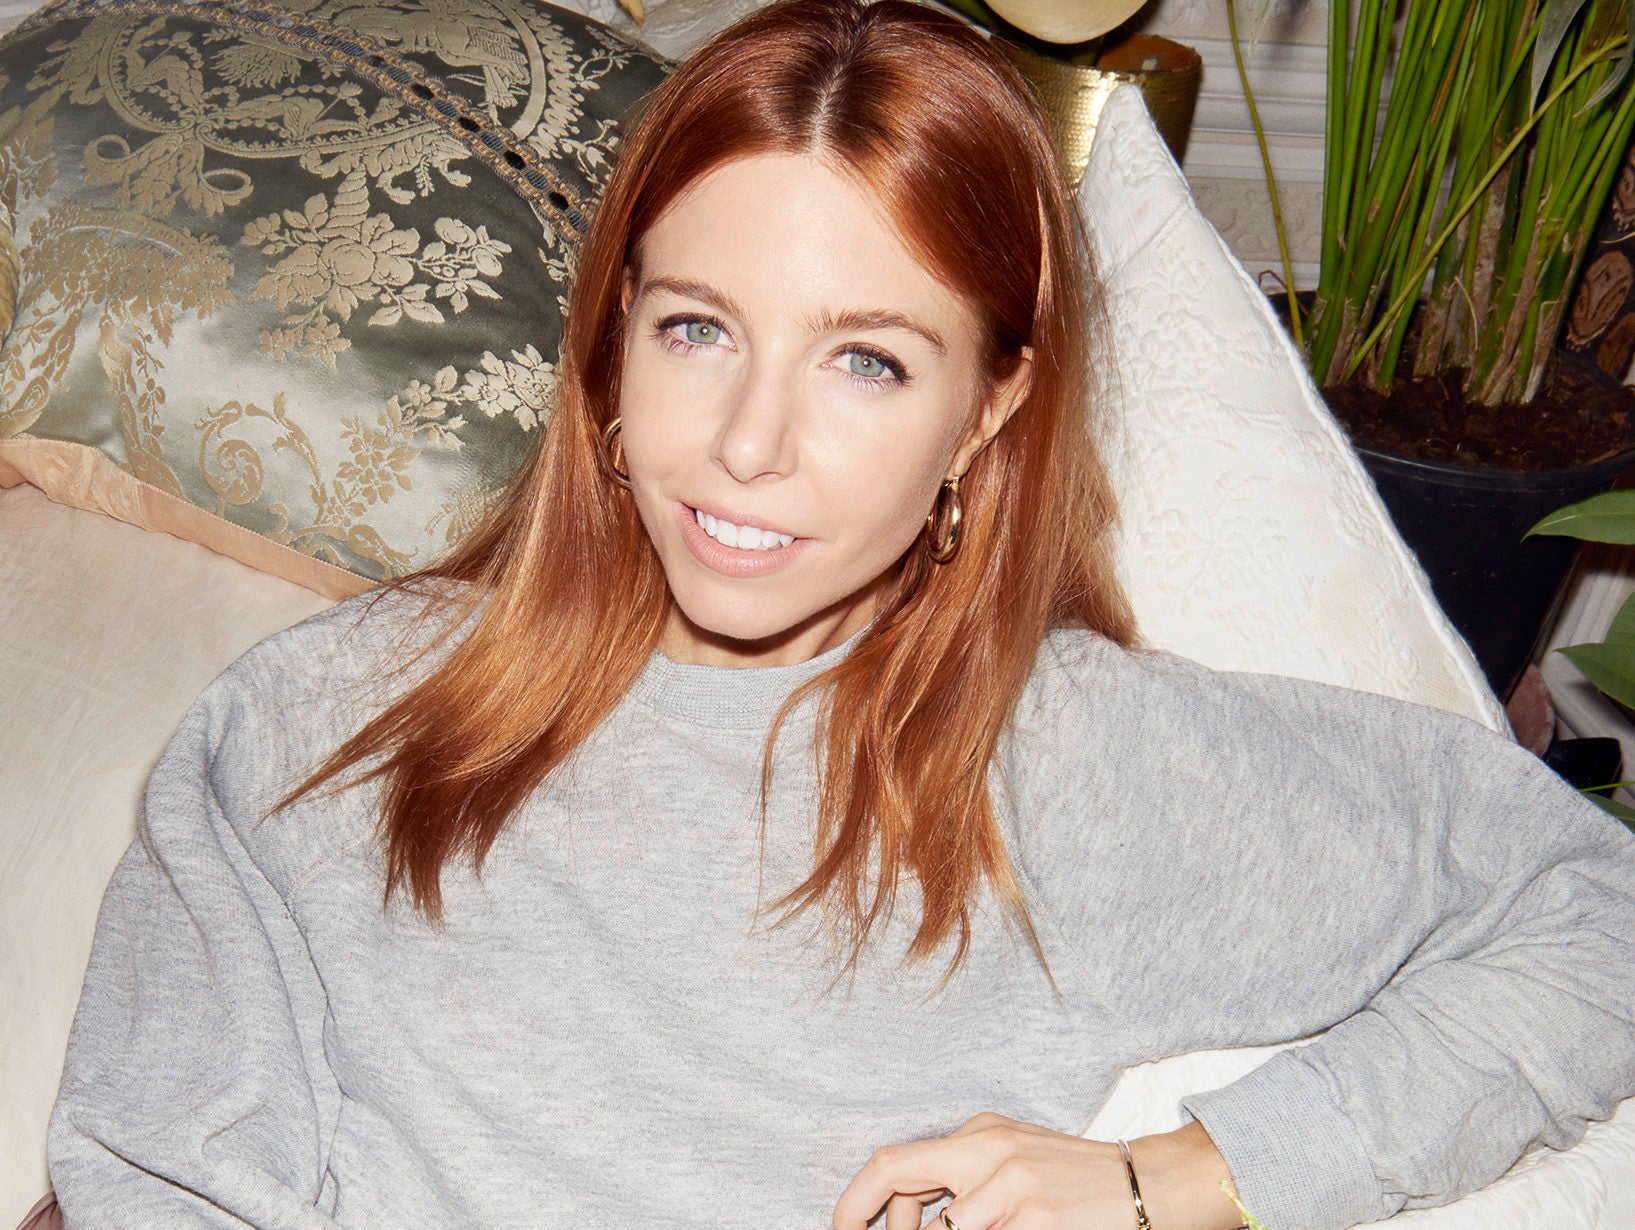 Stacey Dooley joins Grazia as contributing editor to 'highlight important issues' with investigations series